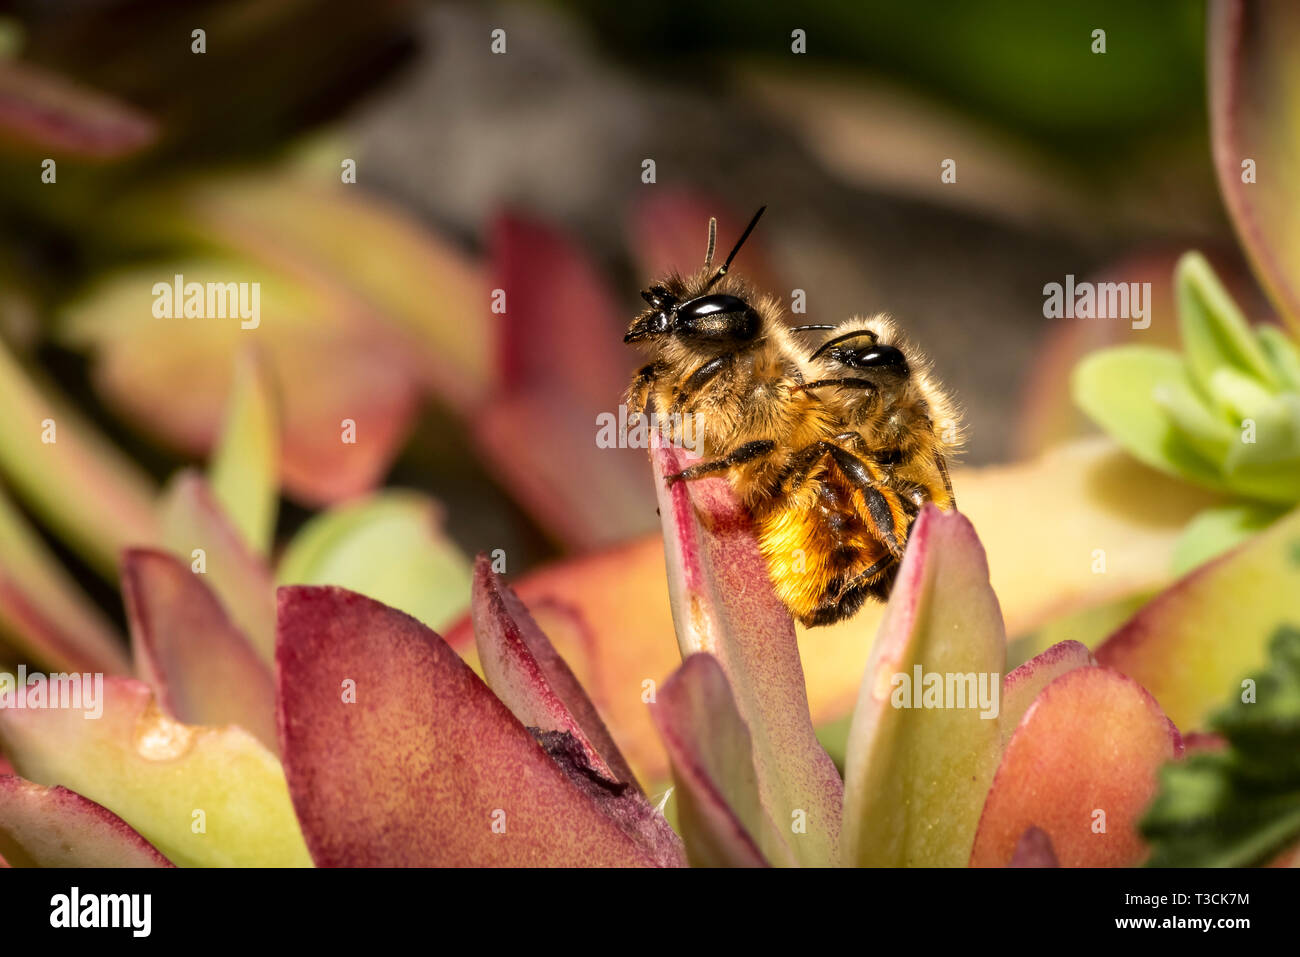 Bumblebees mating on a succulent plant Stock Photo